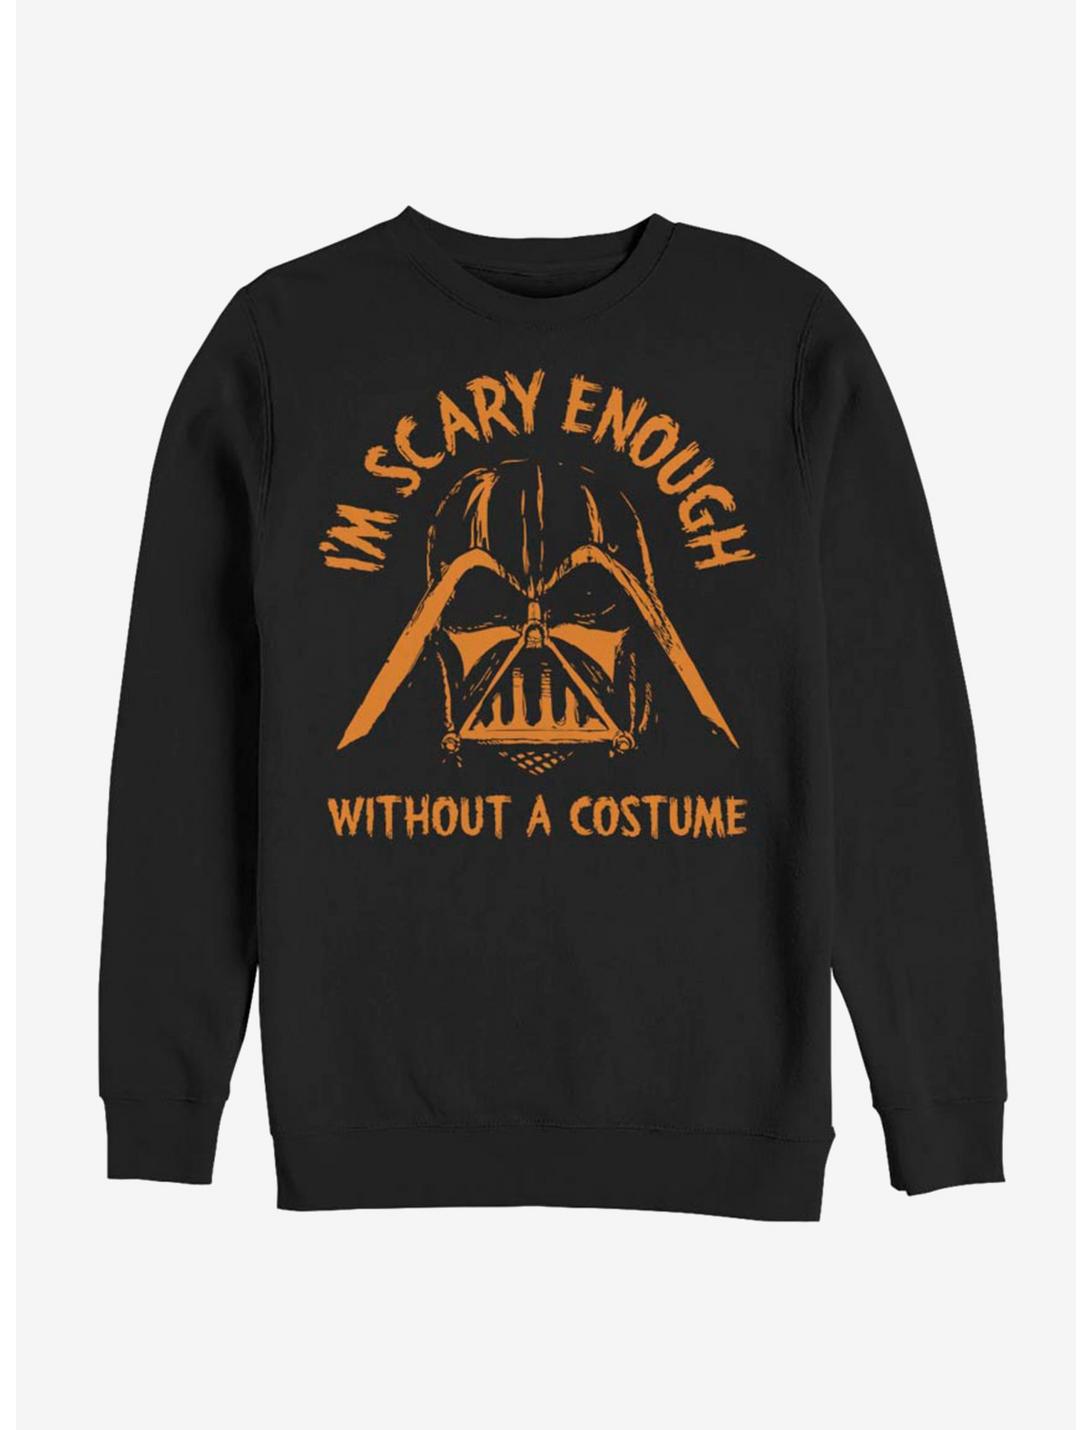 Star Wars Scary Without A Costume Sweatshirt, BLACK, hi-res